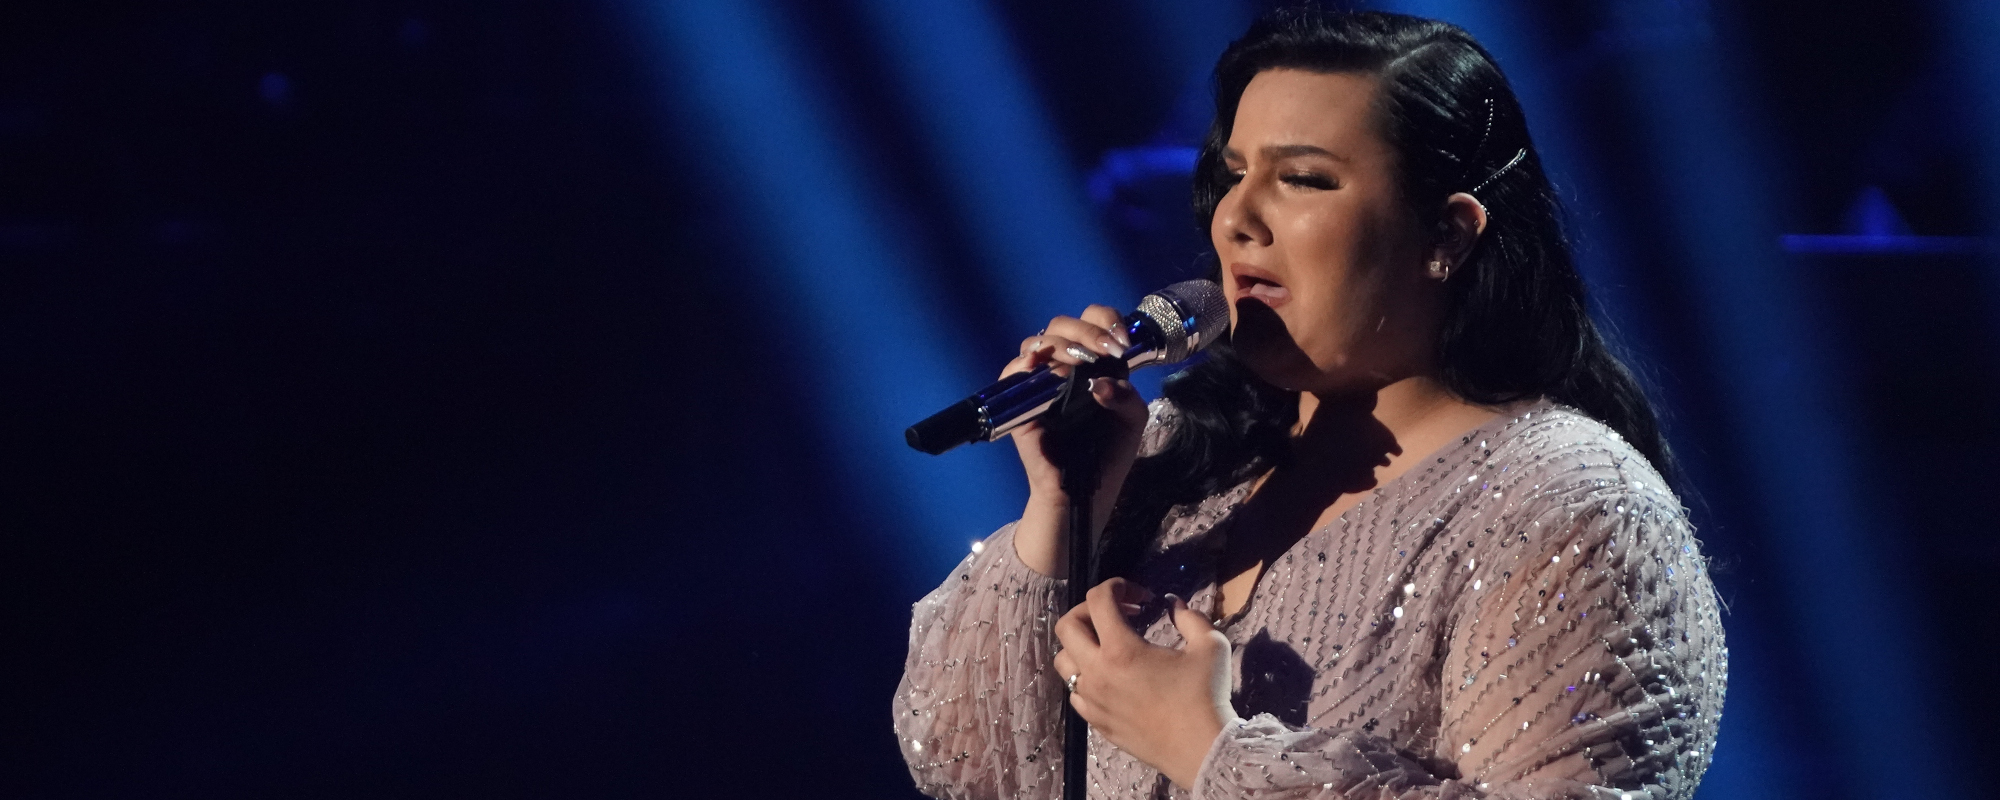 ‘American Idol’ Contestant Nicolina Blows Judges Away with “Hallelujah” Performance